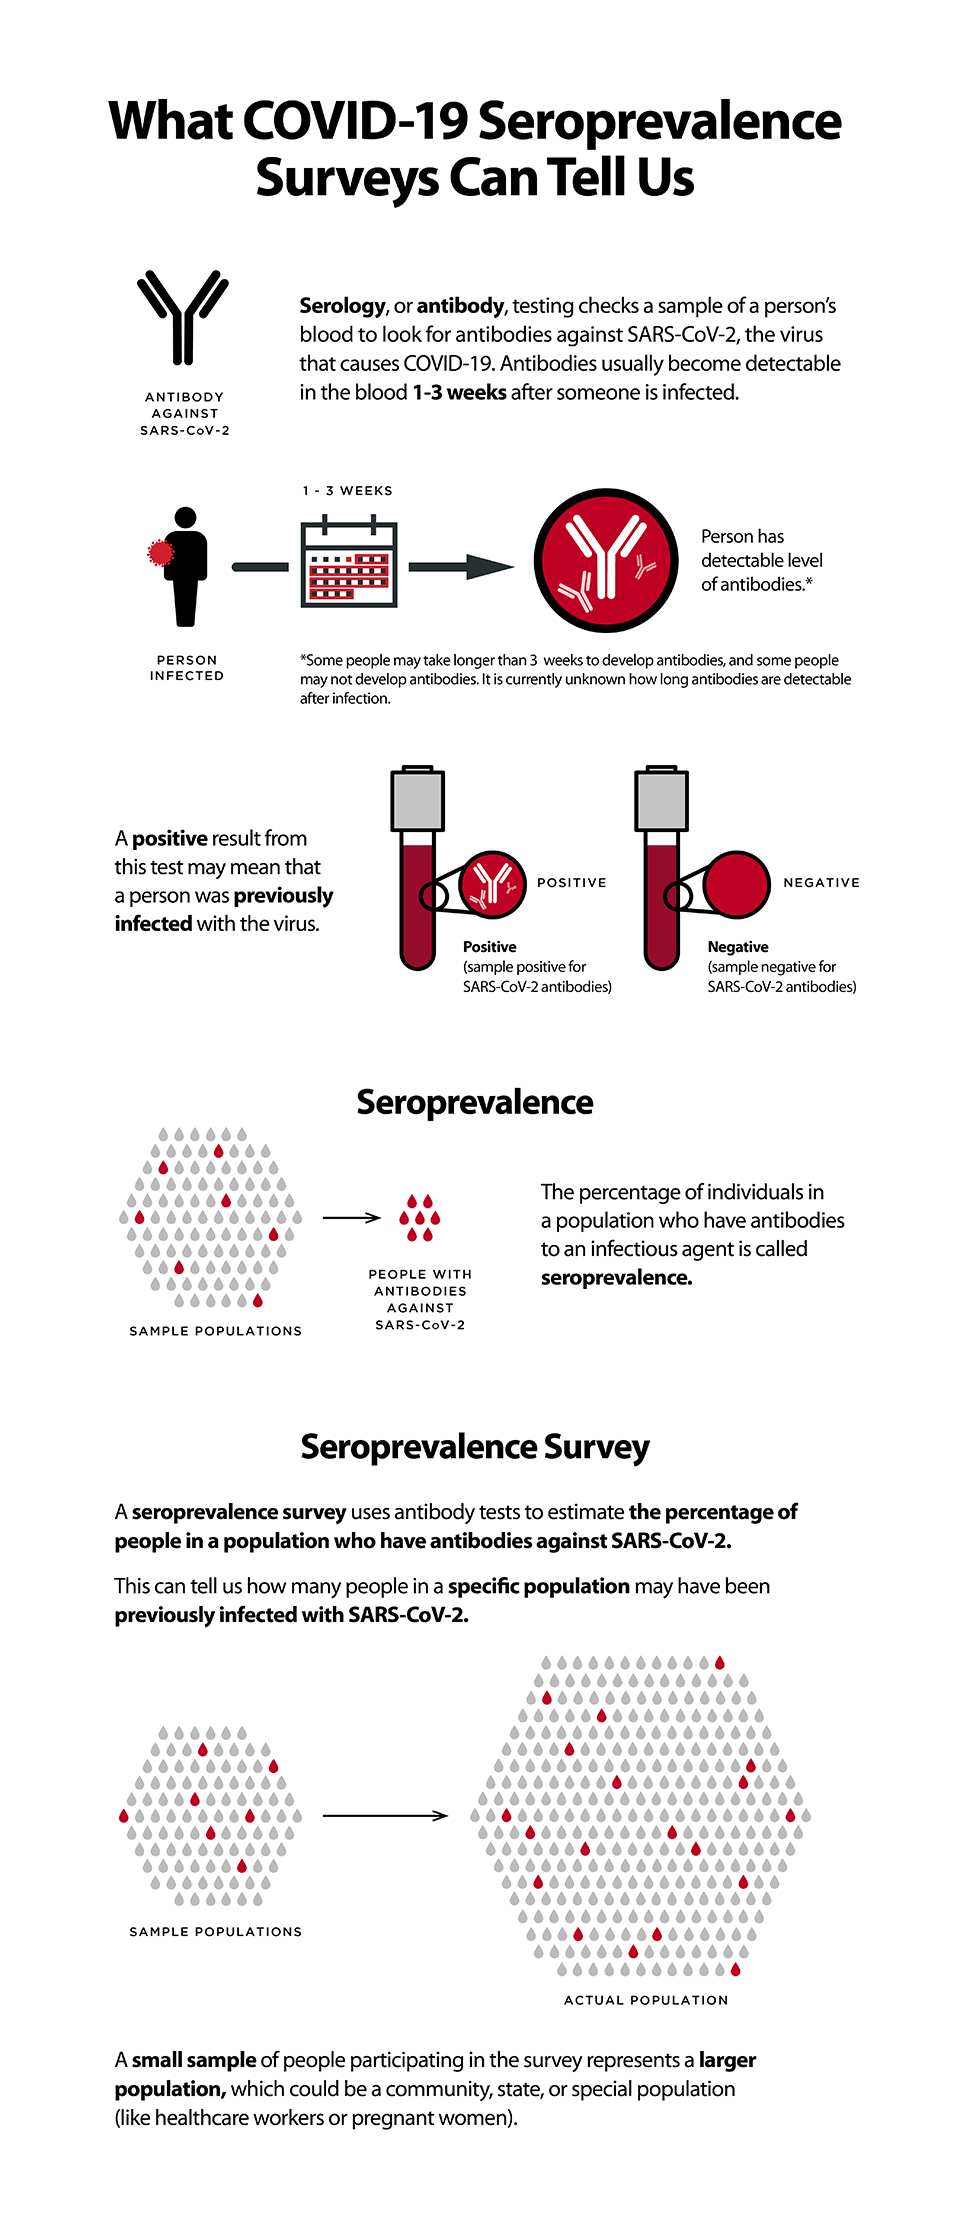 Infographic: A seroprevalence survey uses antibody tests to estimate the percentage of people in a population who have antibodies against SARS-CoV-2. This page includes a graphic explaining how seroprevlance surveys use antibody test to measure the percent of a population likely have a past infections with SARS-CoV-2, the virus that causes COVID-19.